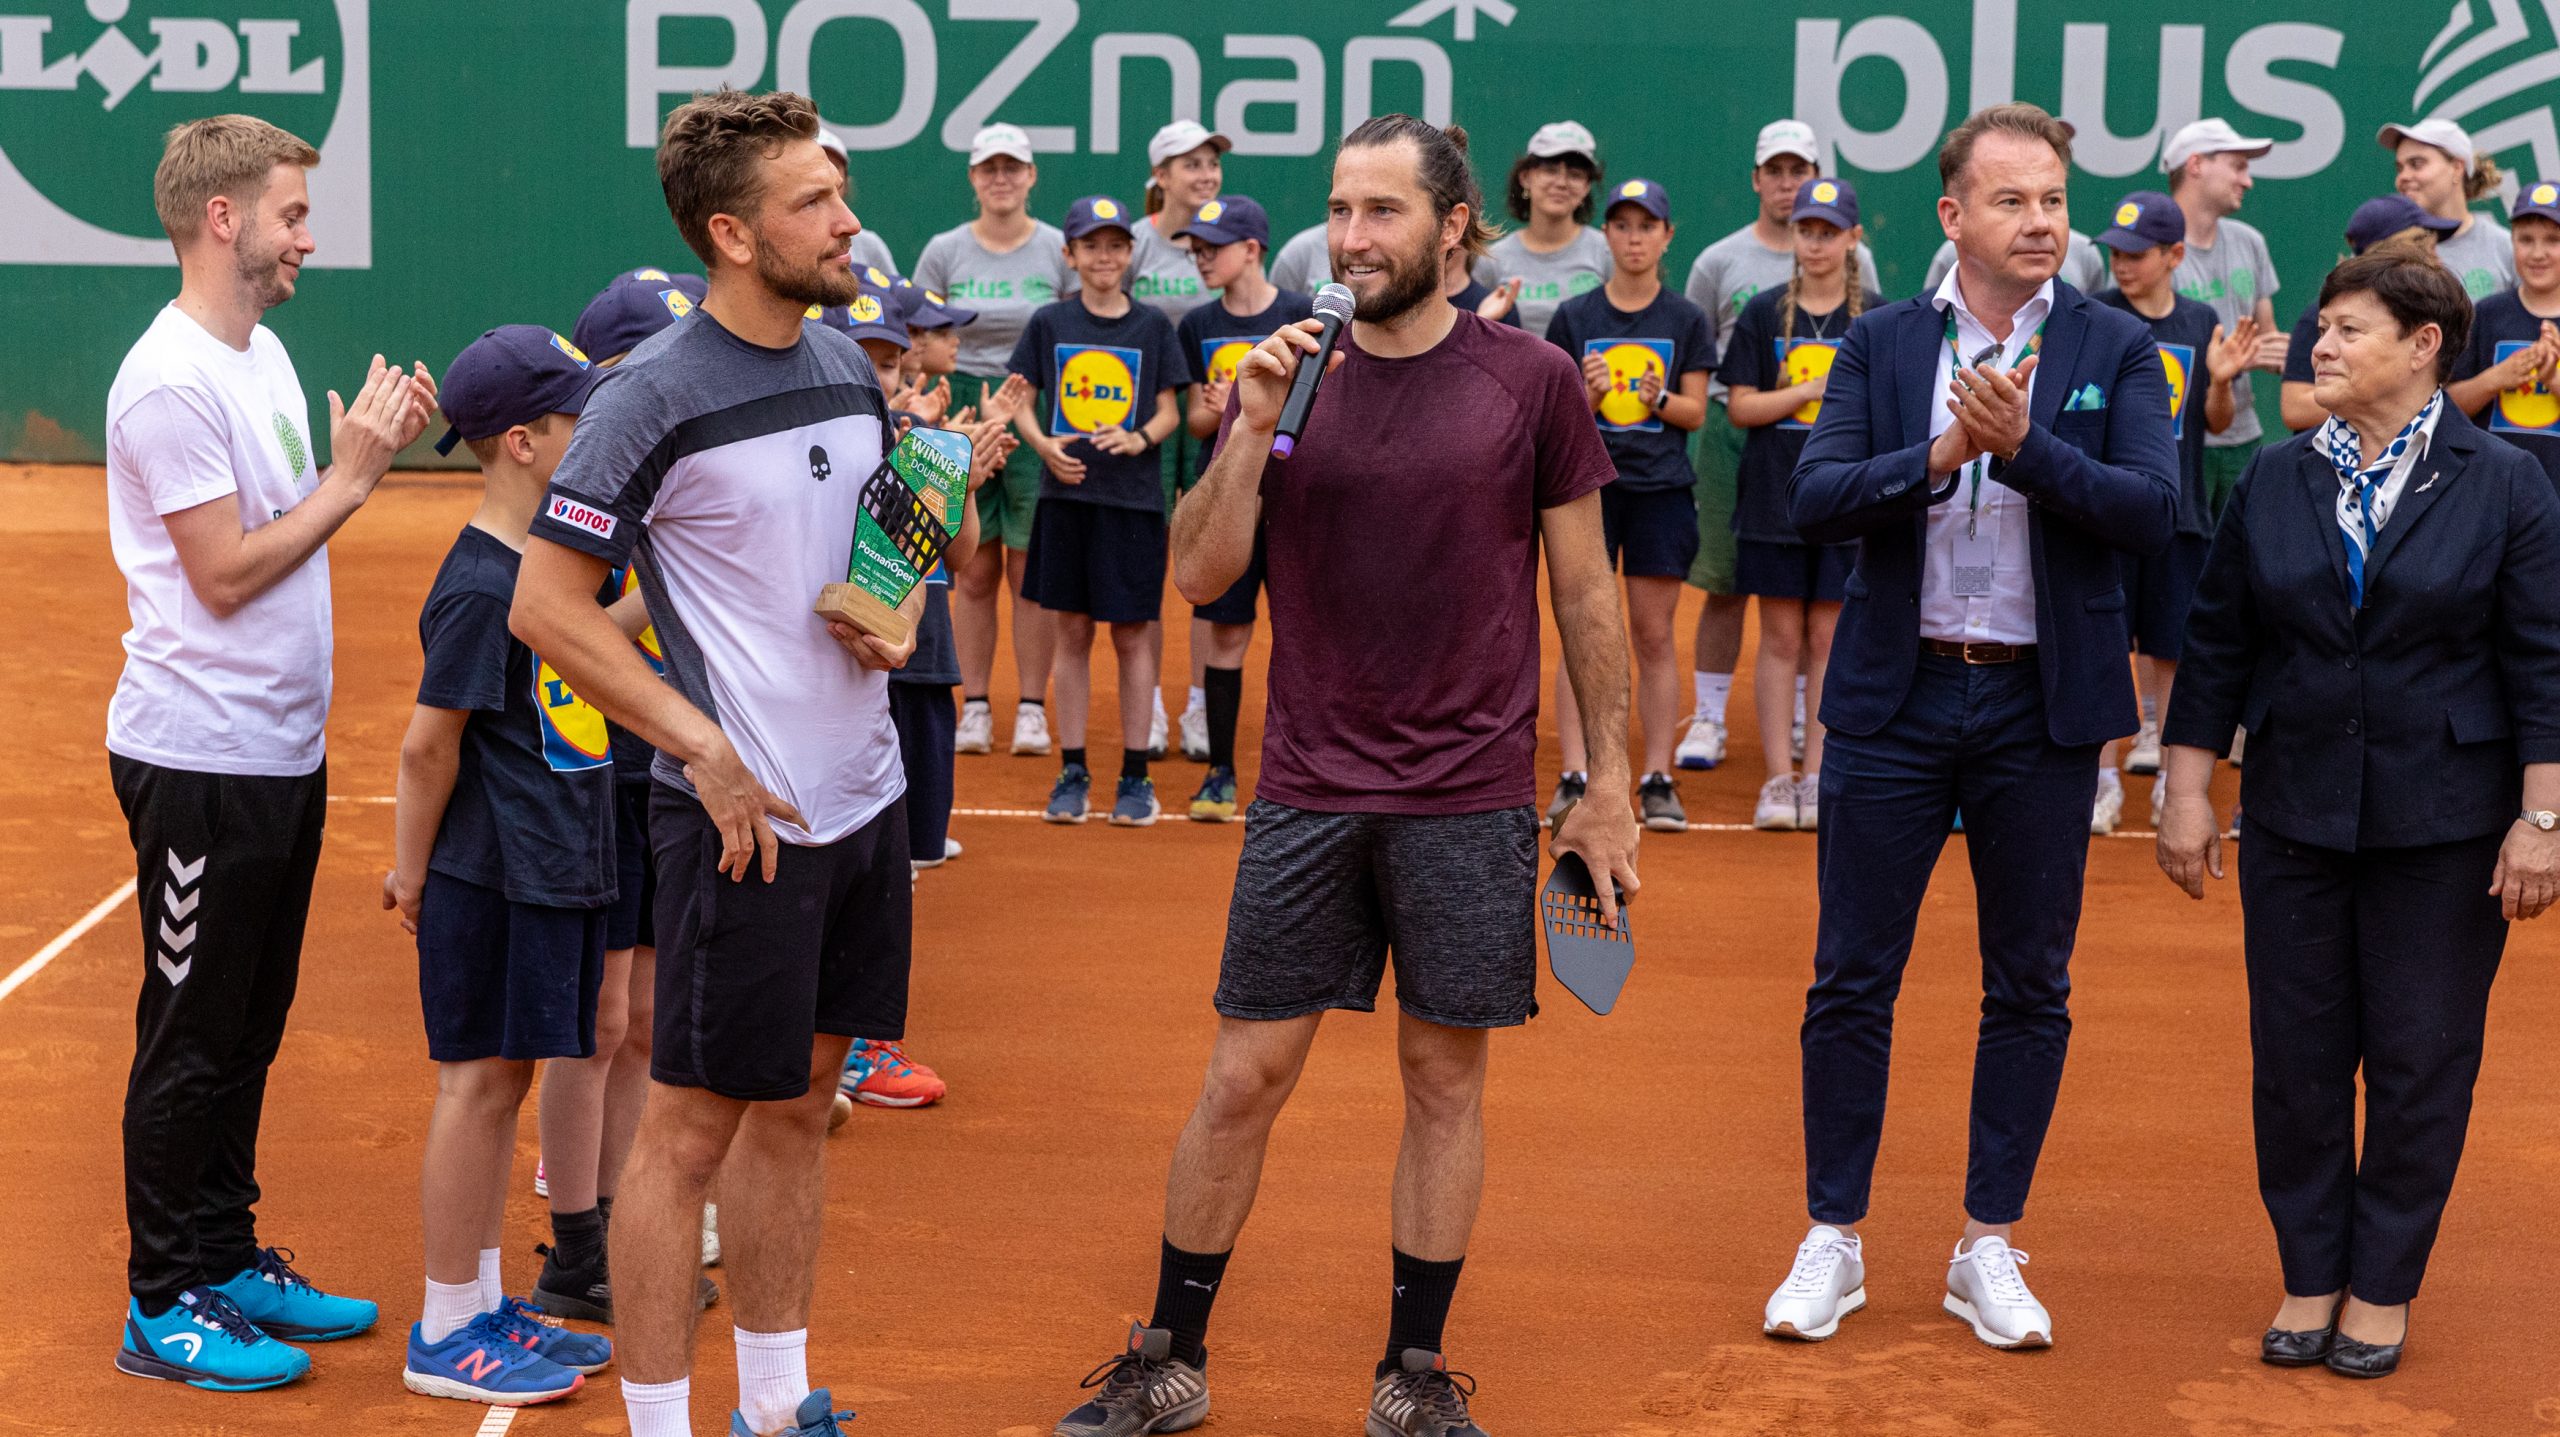 Poznań Open doubles champions.